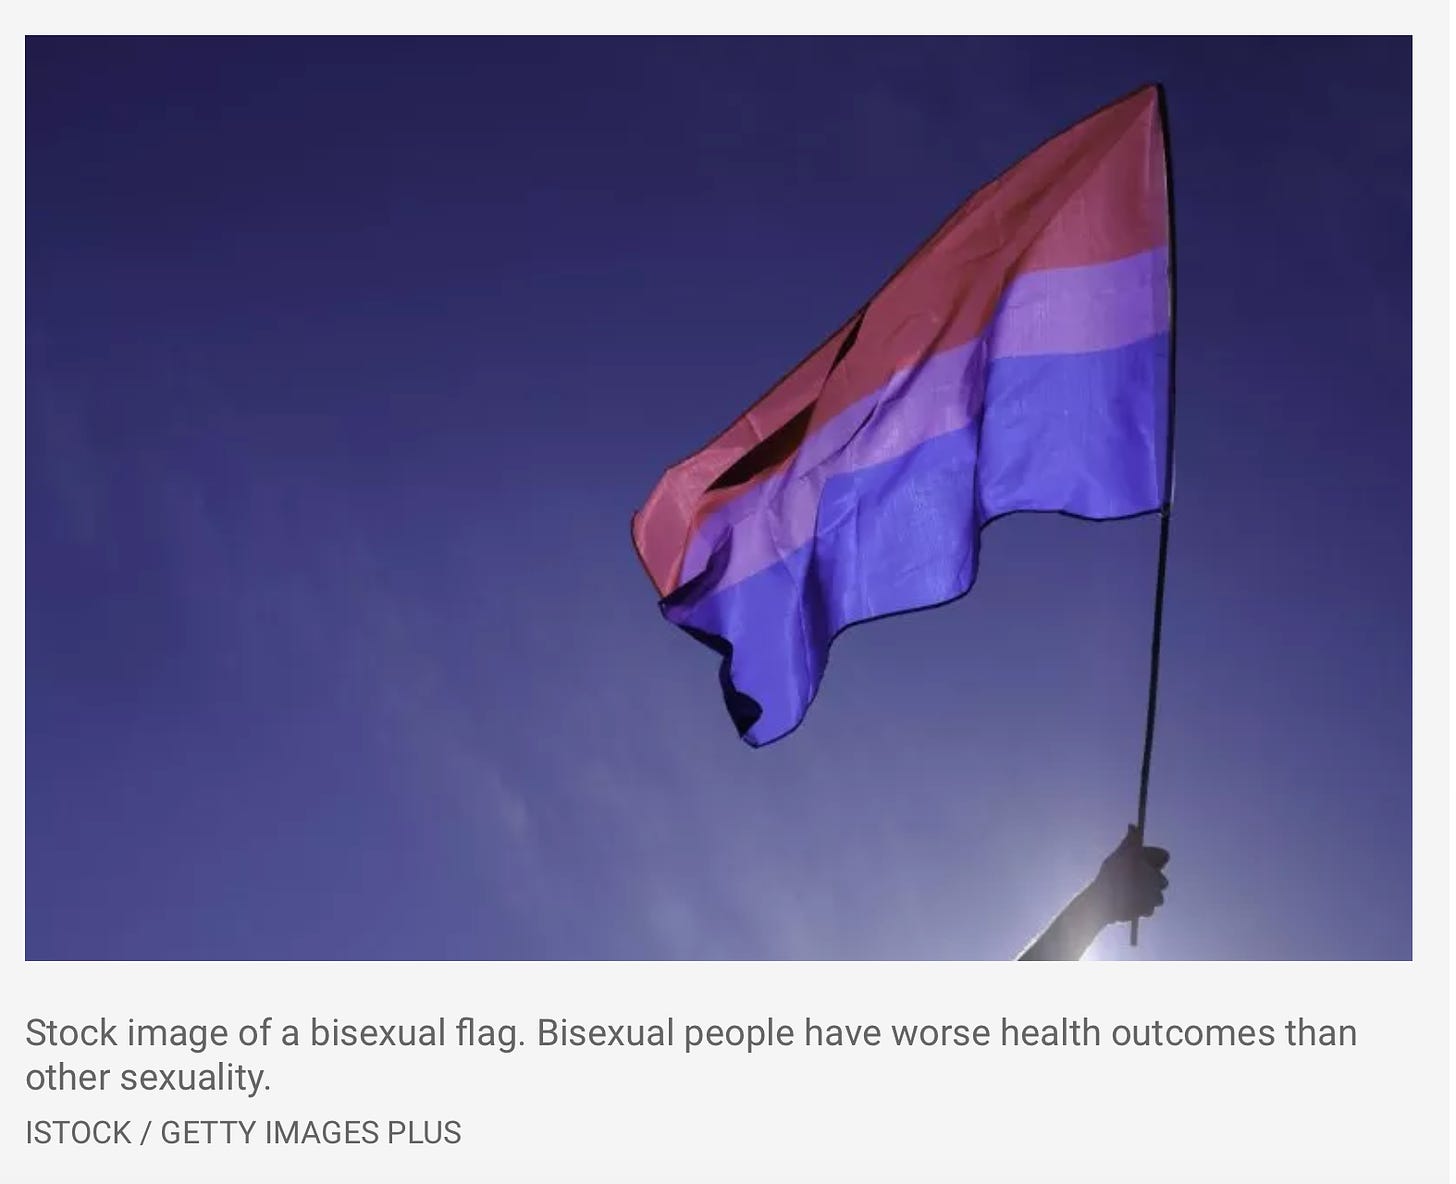 A photo of a bi pride flag with the caption: "Stock image of a bisexual flag. Bisexual people have worse health outcomes than other sexuality."